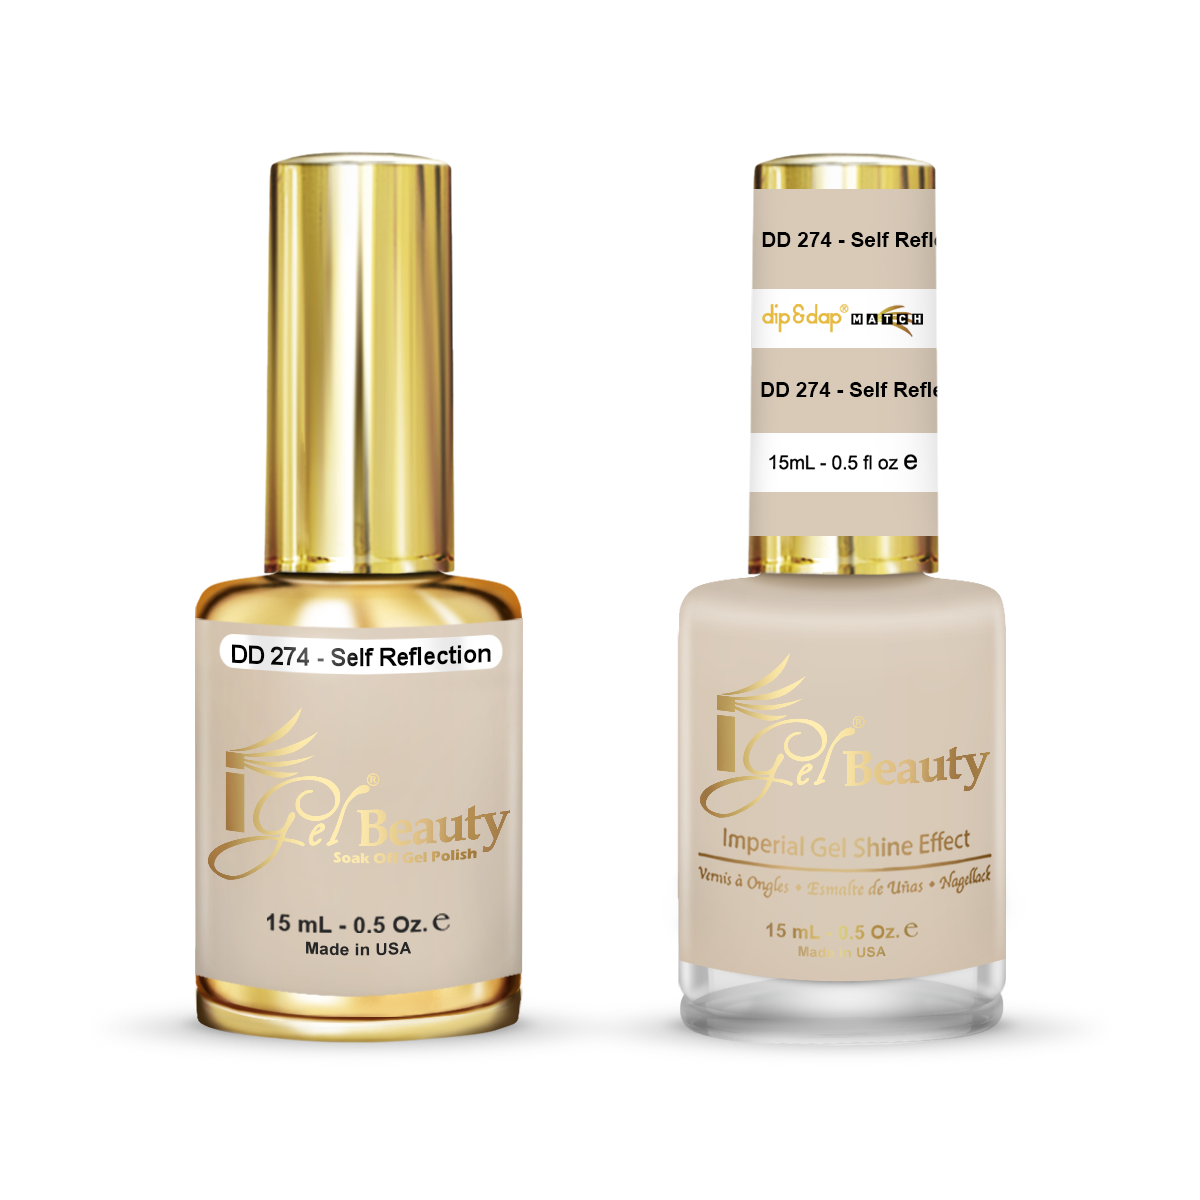 DD274 Self Reflection Gel and Polish Duo By IGel Beauty